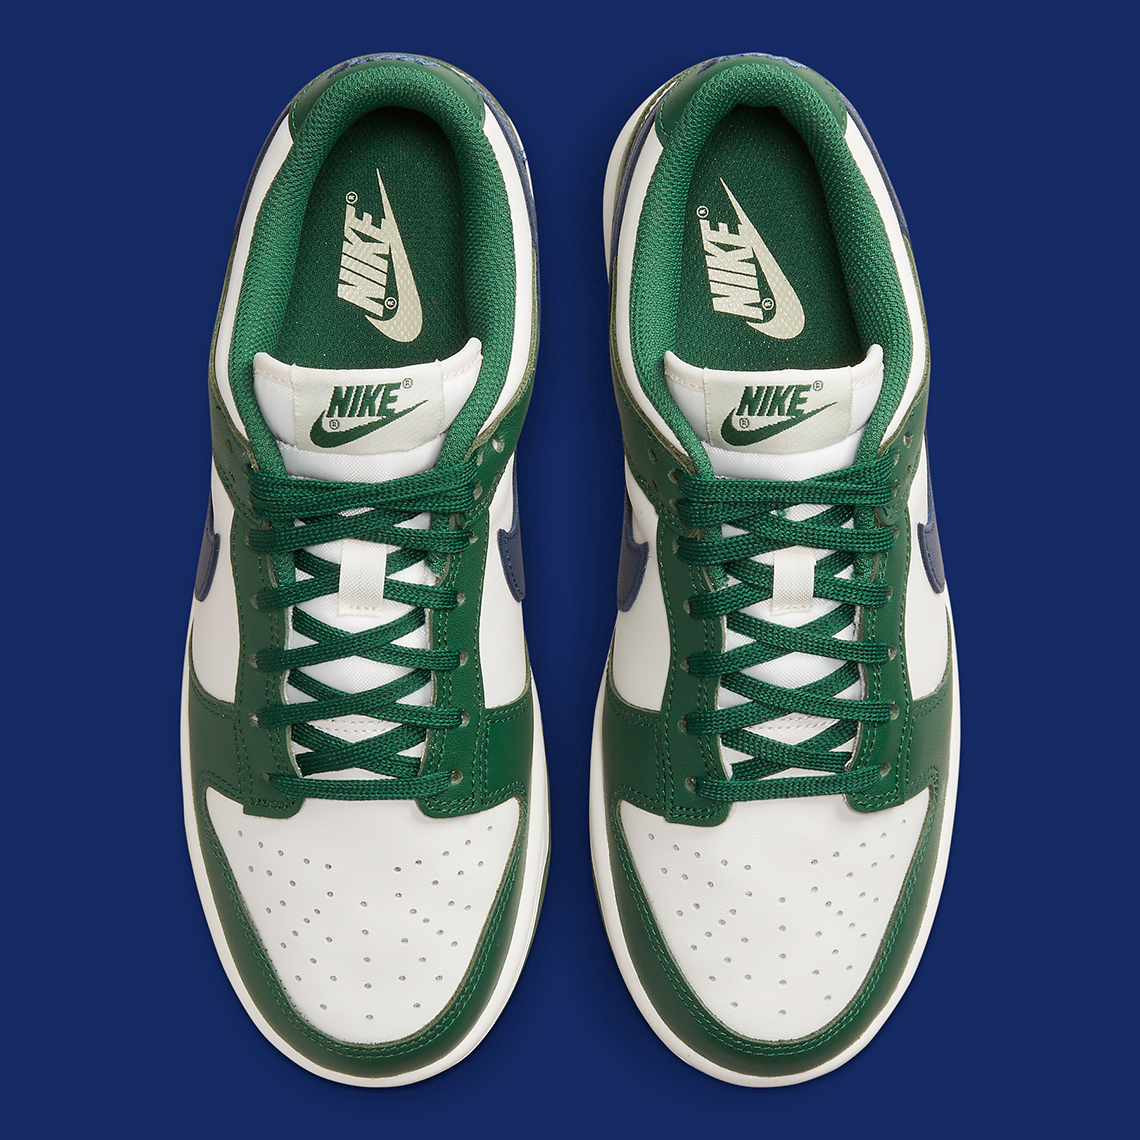 Nike SB has shown us lately that the Gorge Green Dd1503 300 2